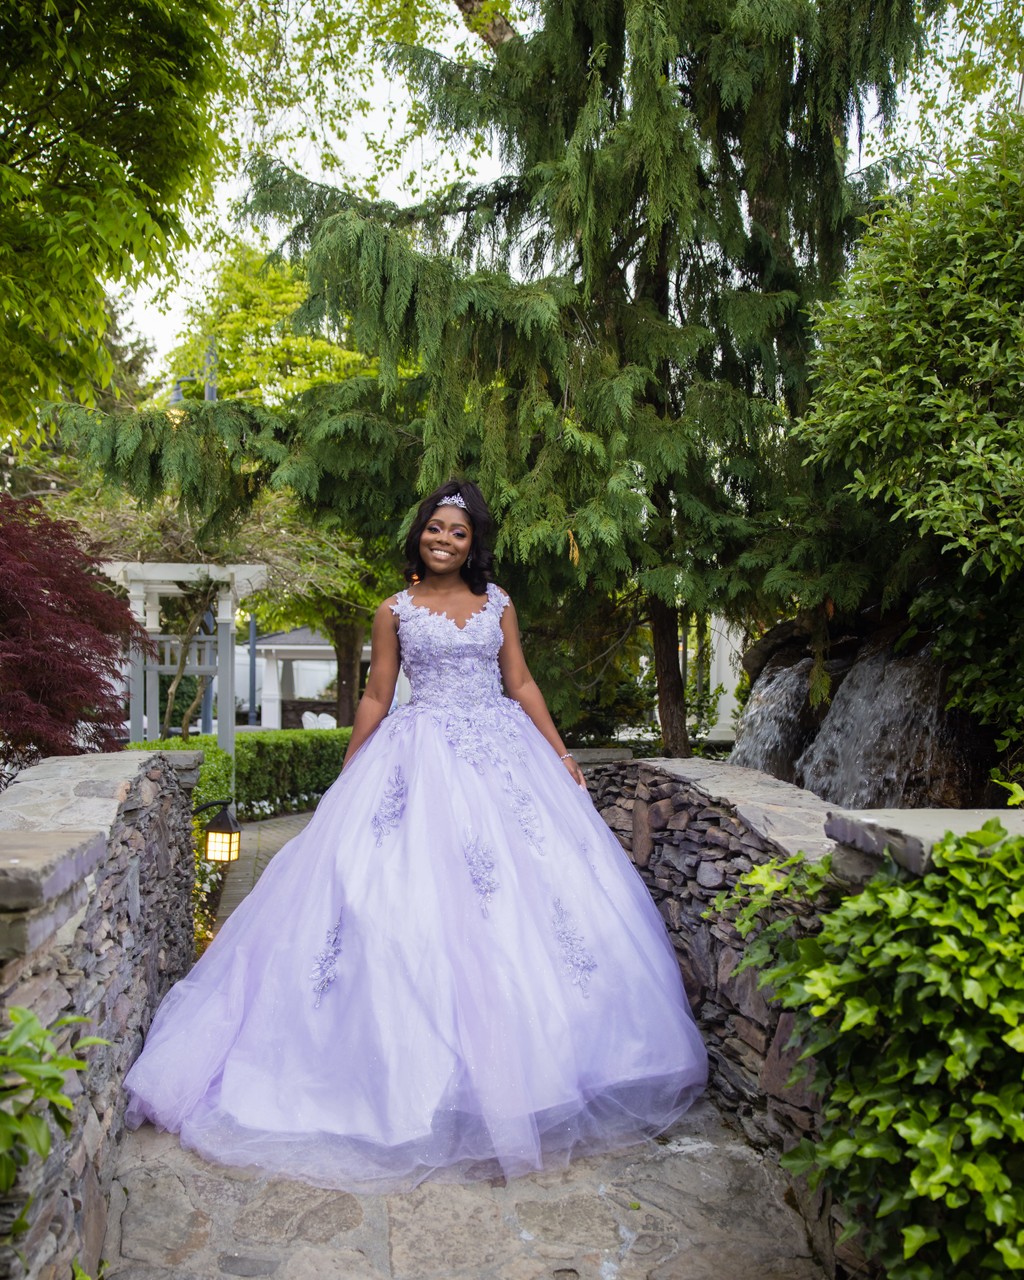 Beat Watermill sweet 16 photography